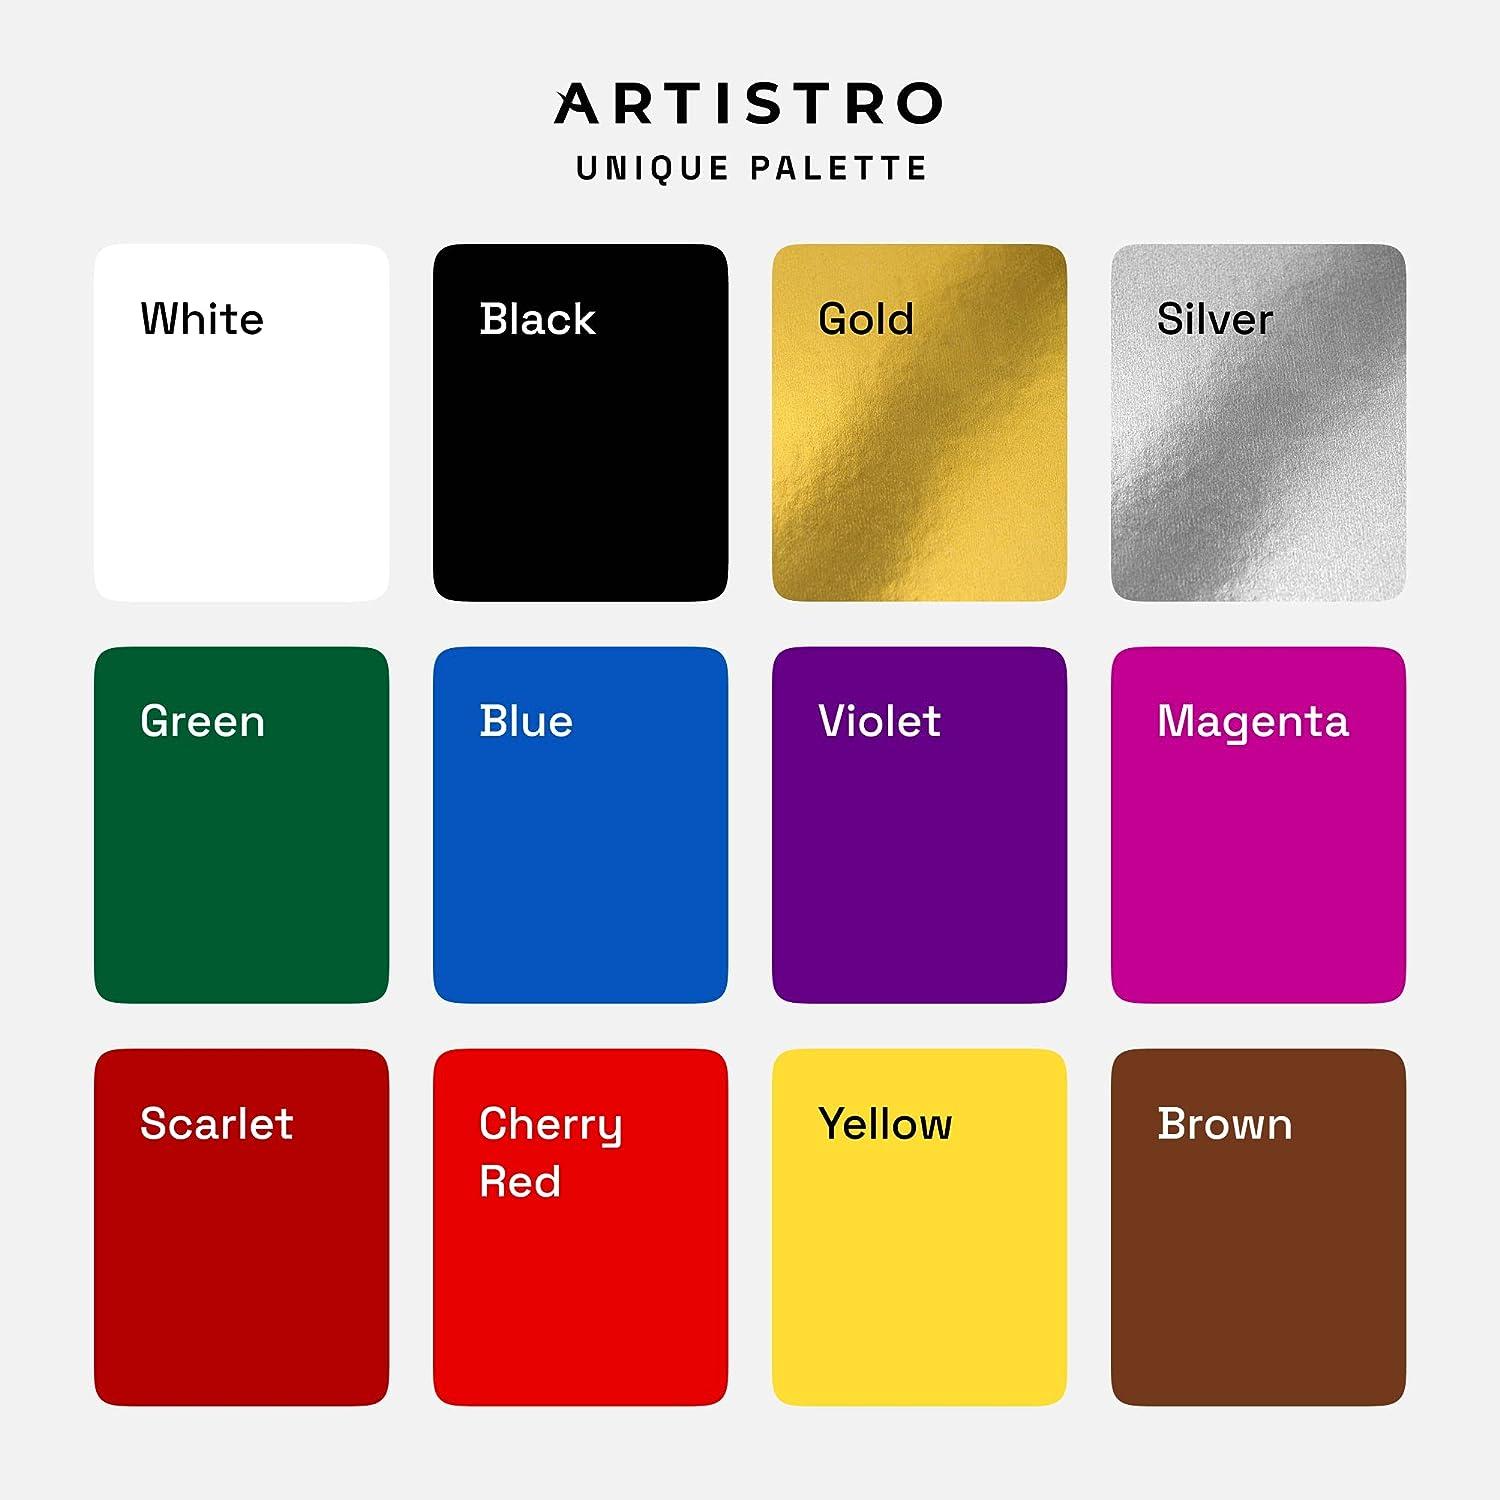 ARTISTRO Paint Pens for Rock Painting, Stone, Ceramic, Glass, Wood